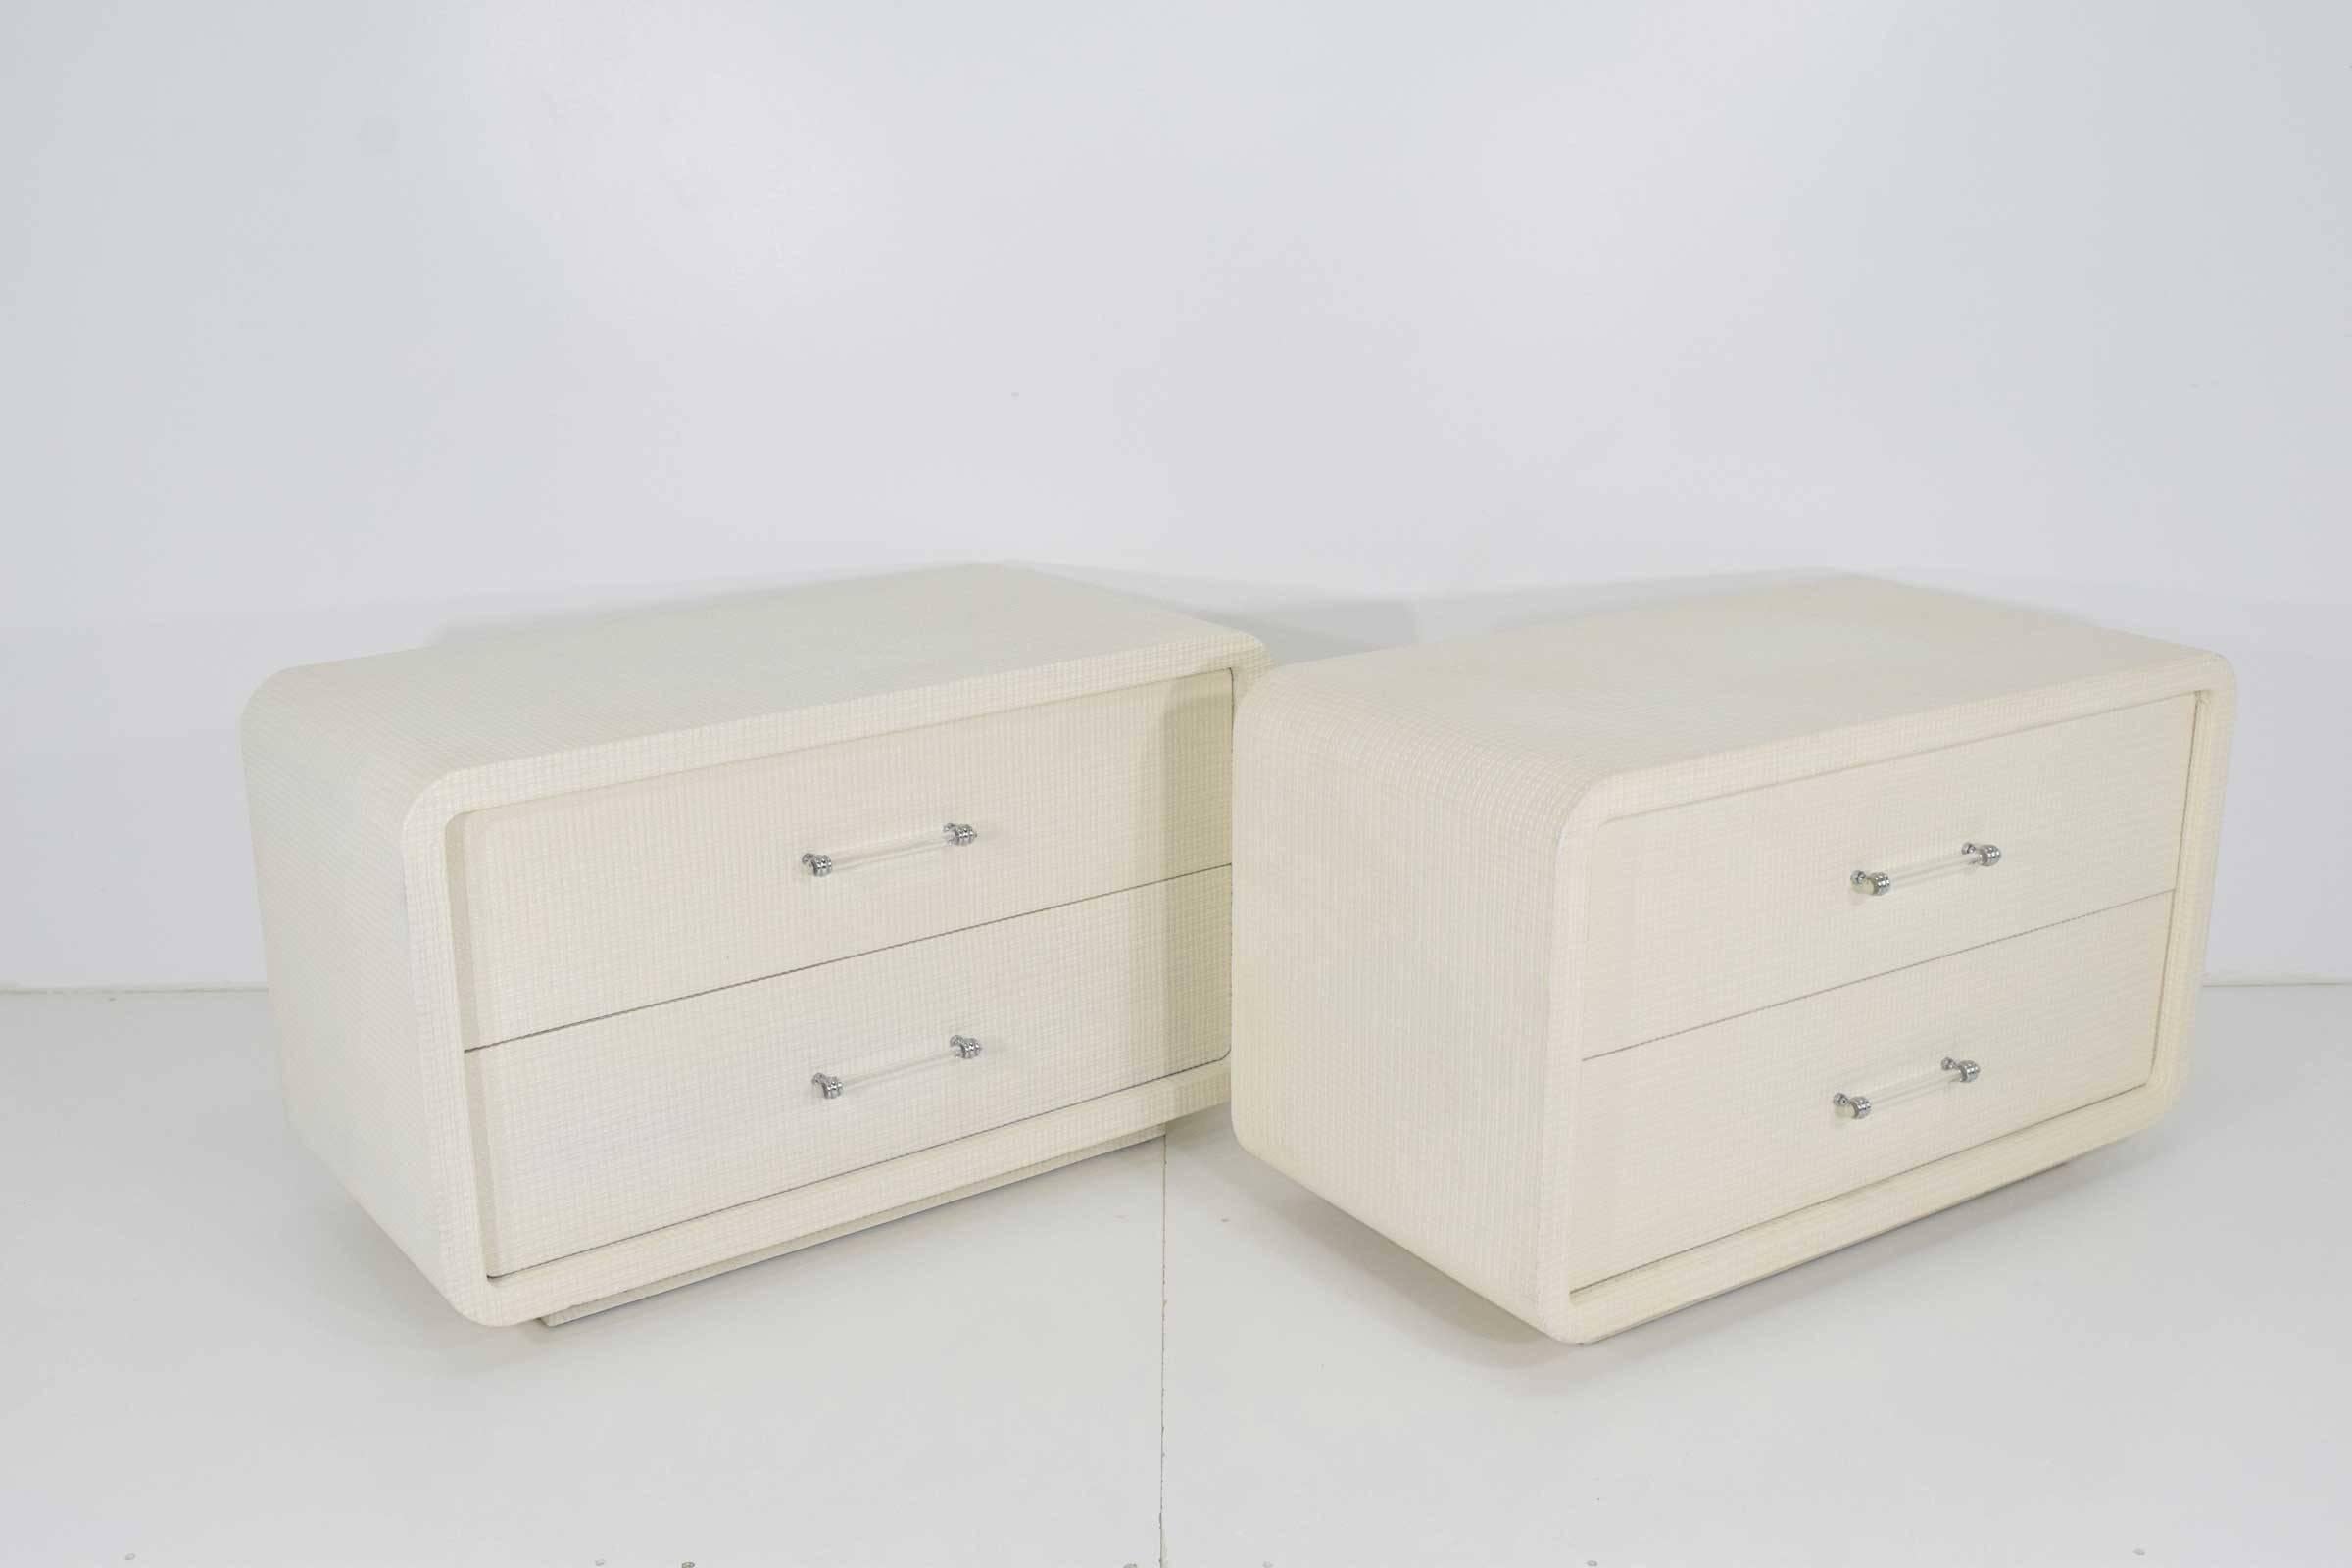 Nightstands are very well-made, rounded edges, lacquered grasscloth, Lucite handles. Each chest has two drawers.